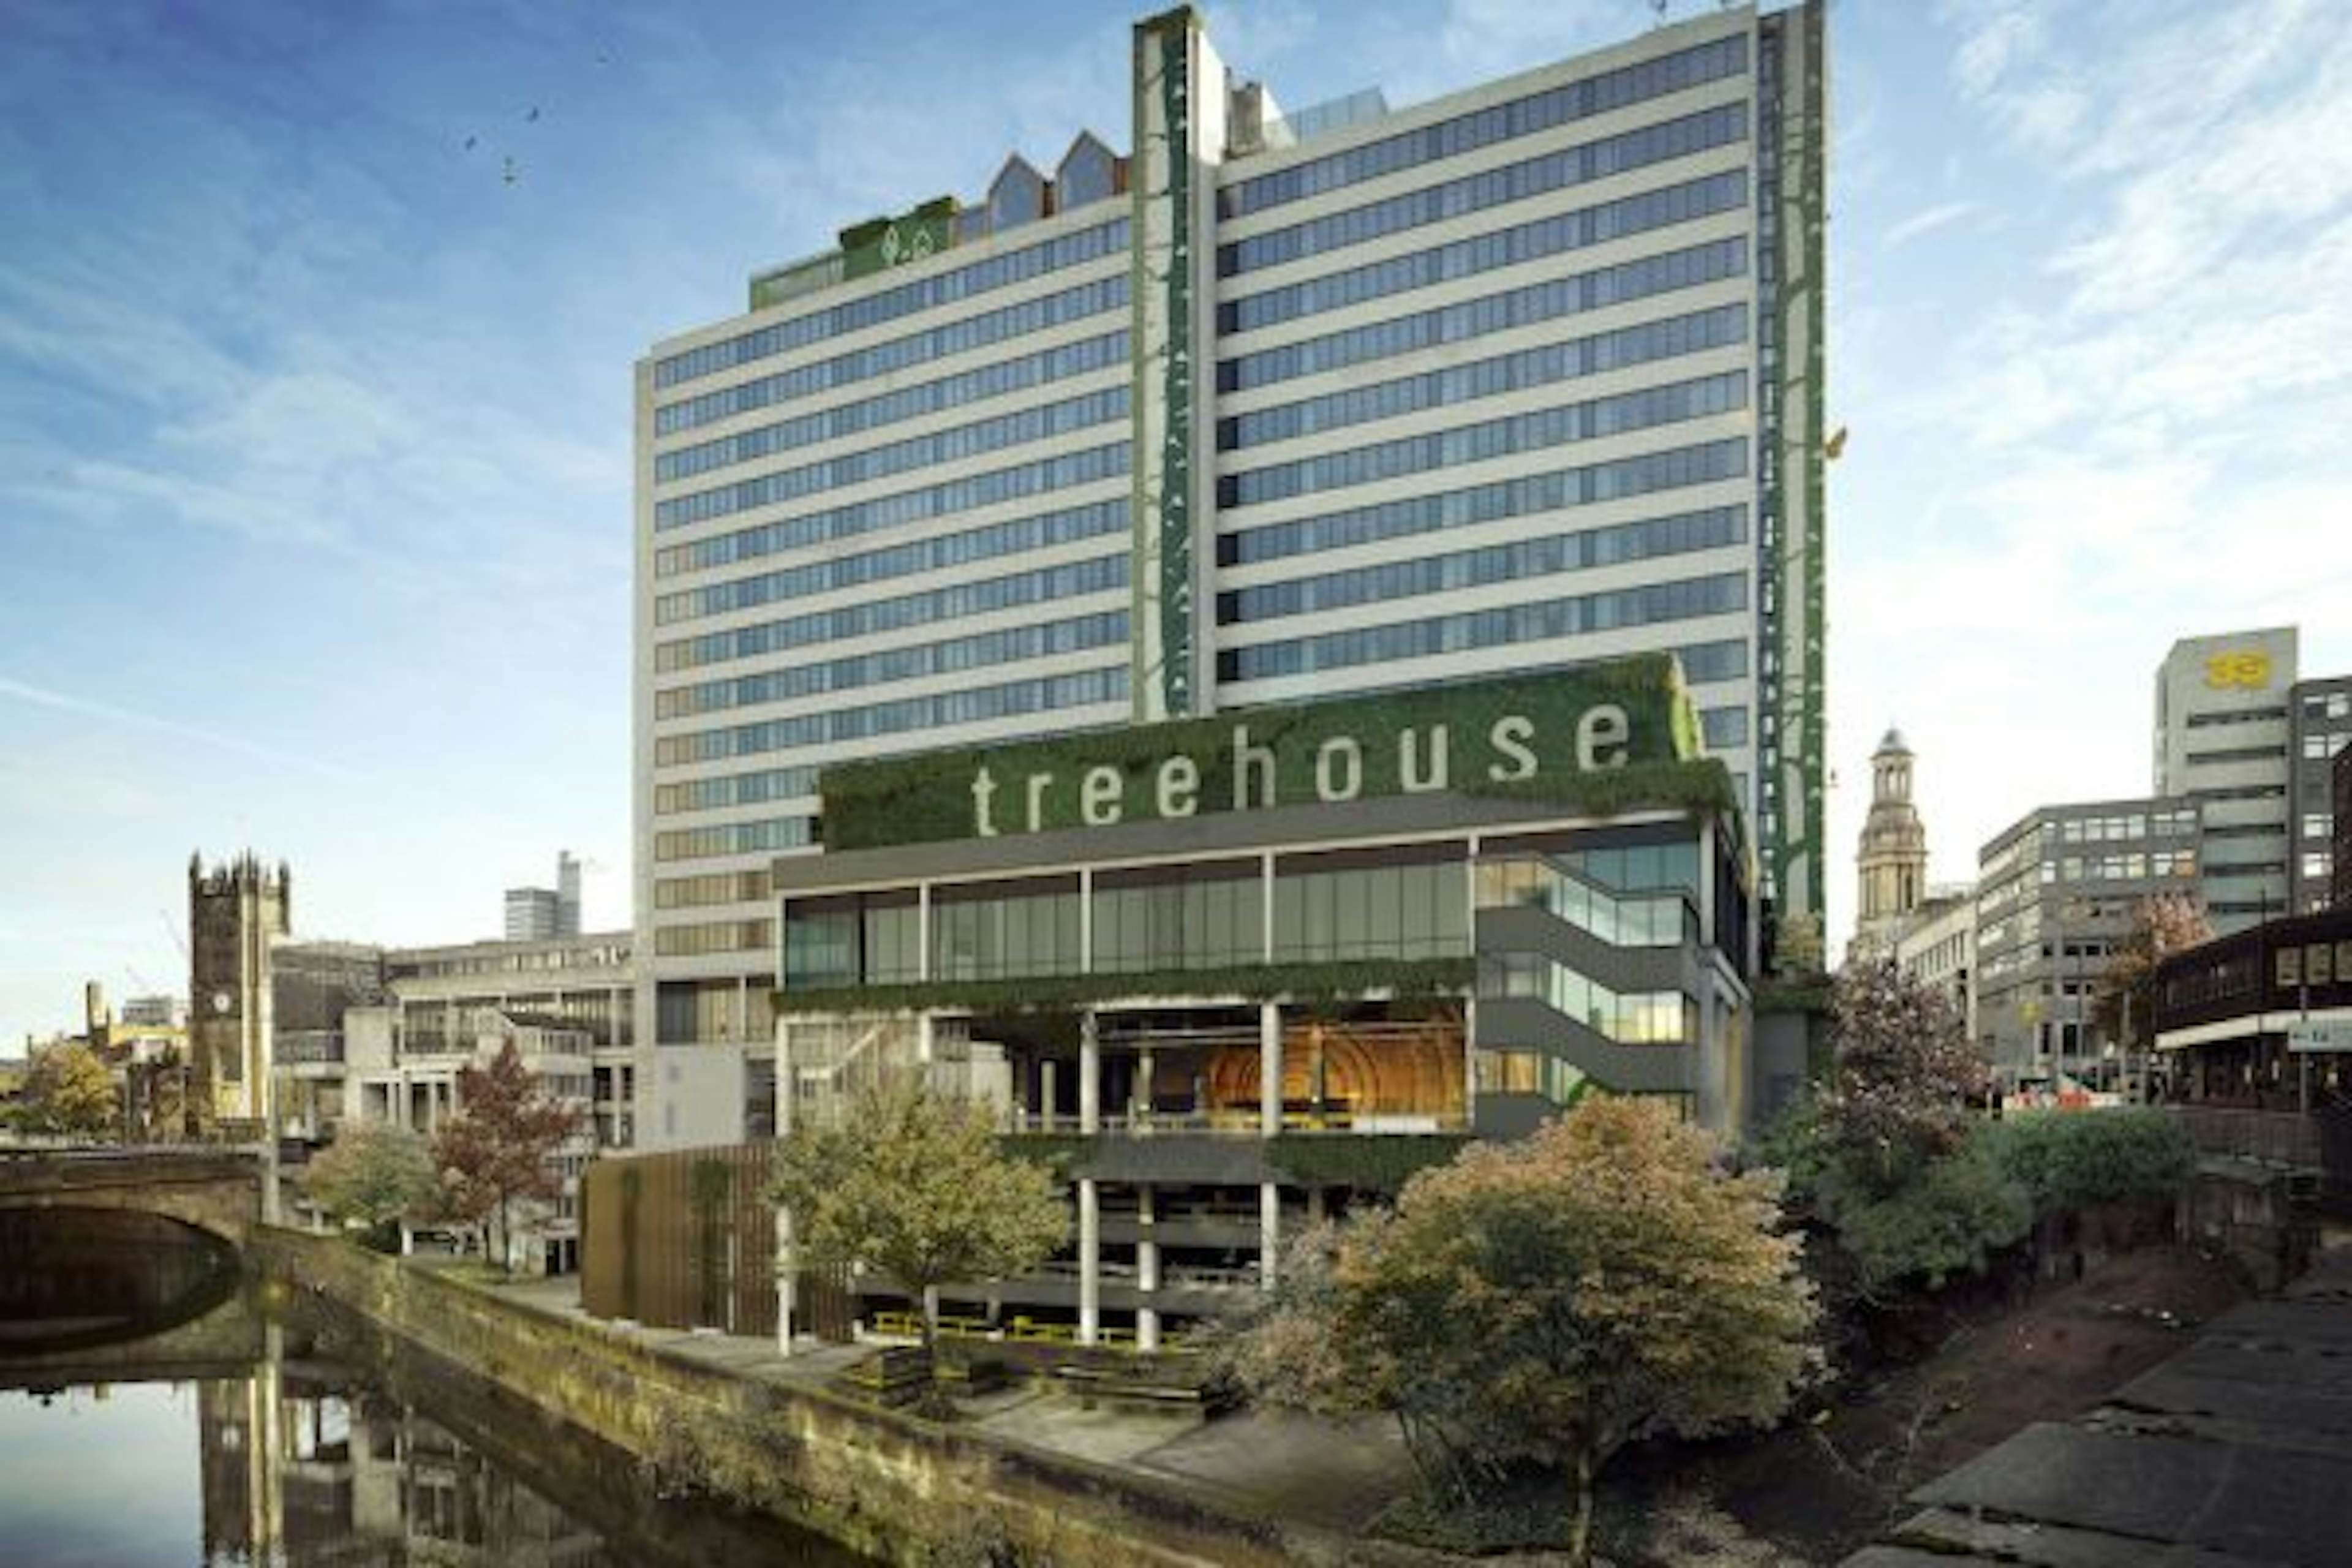 Treehouse Hotel Manchester - Treehouse Hotel Manchester image 2